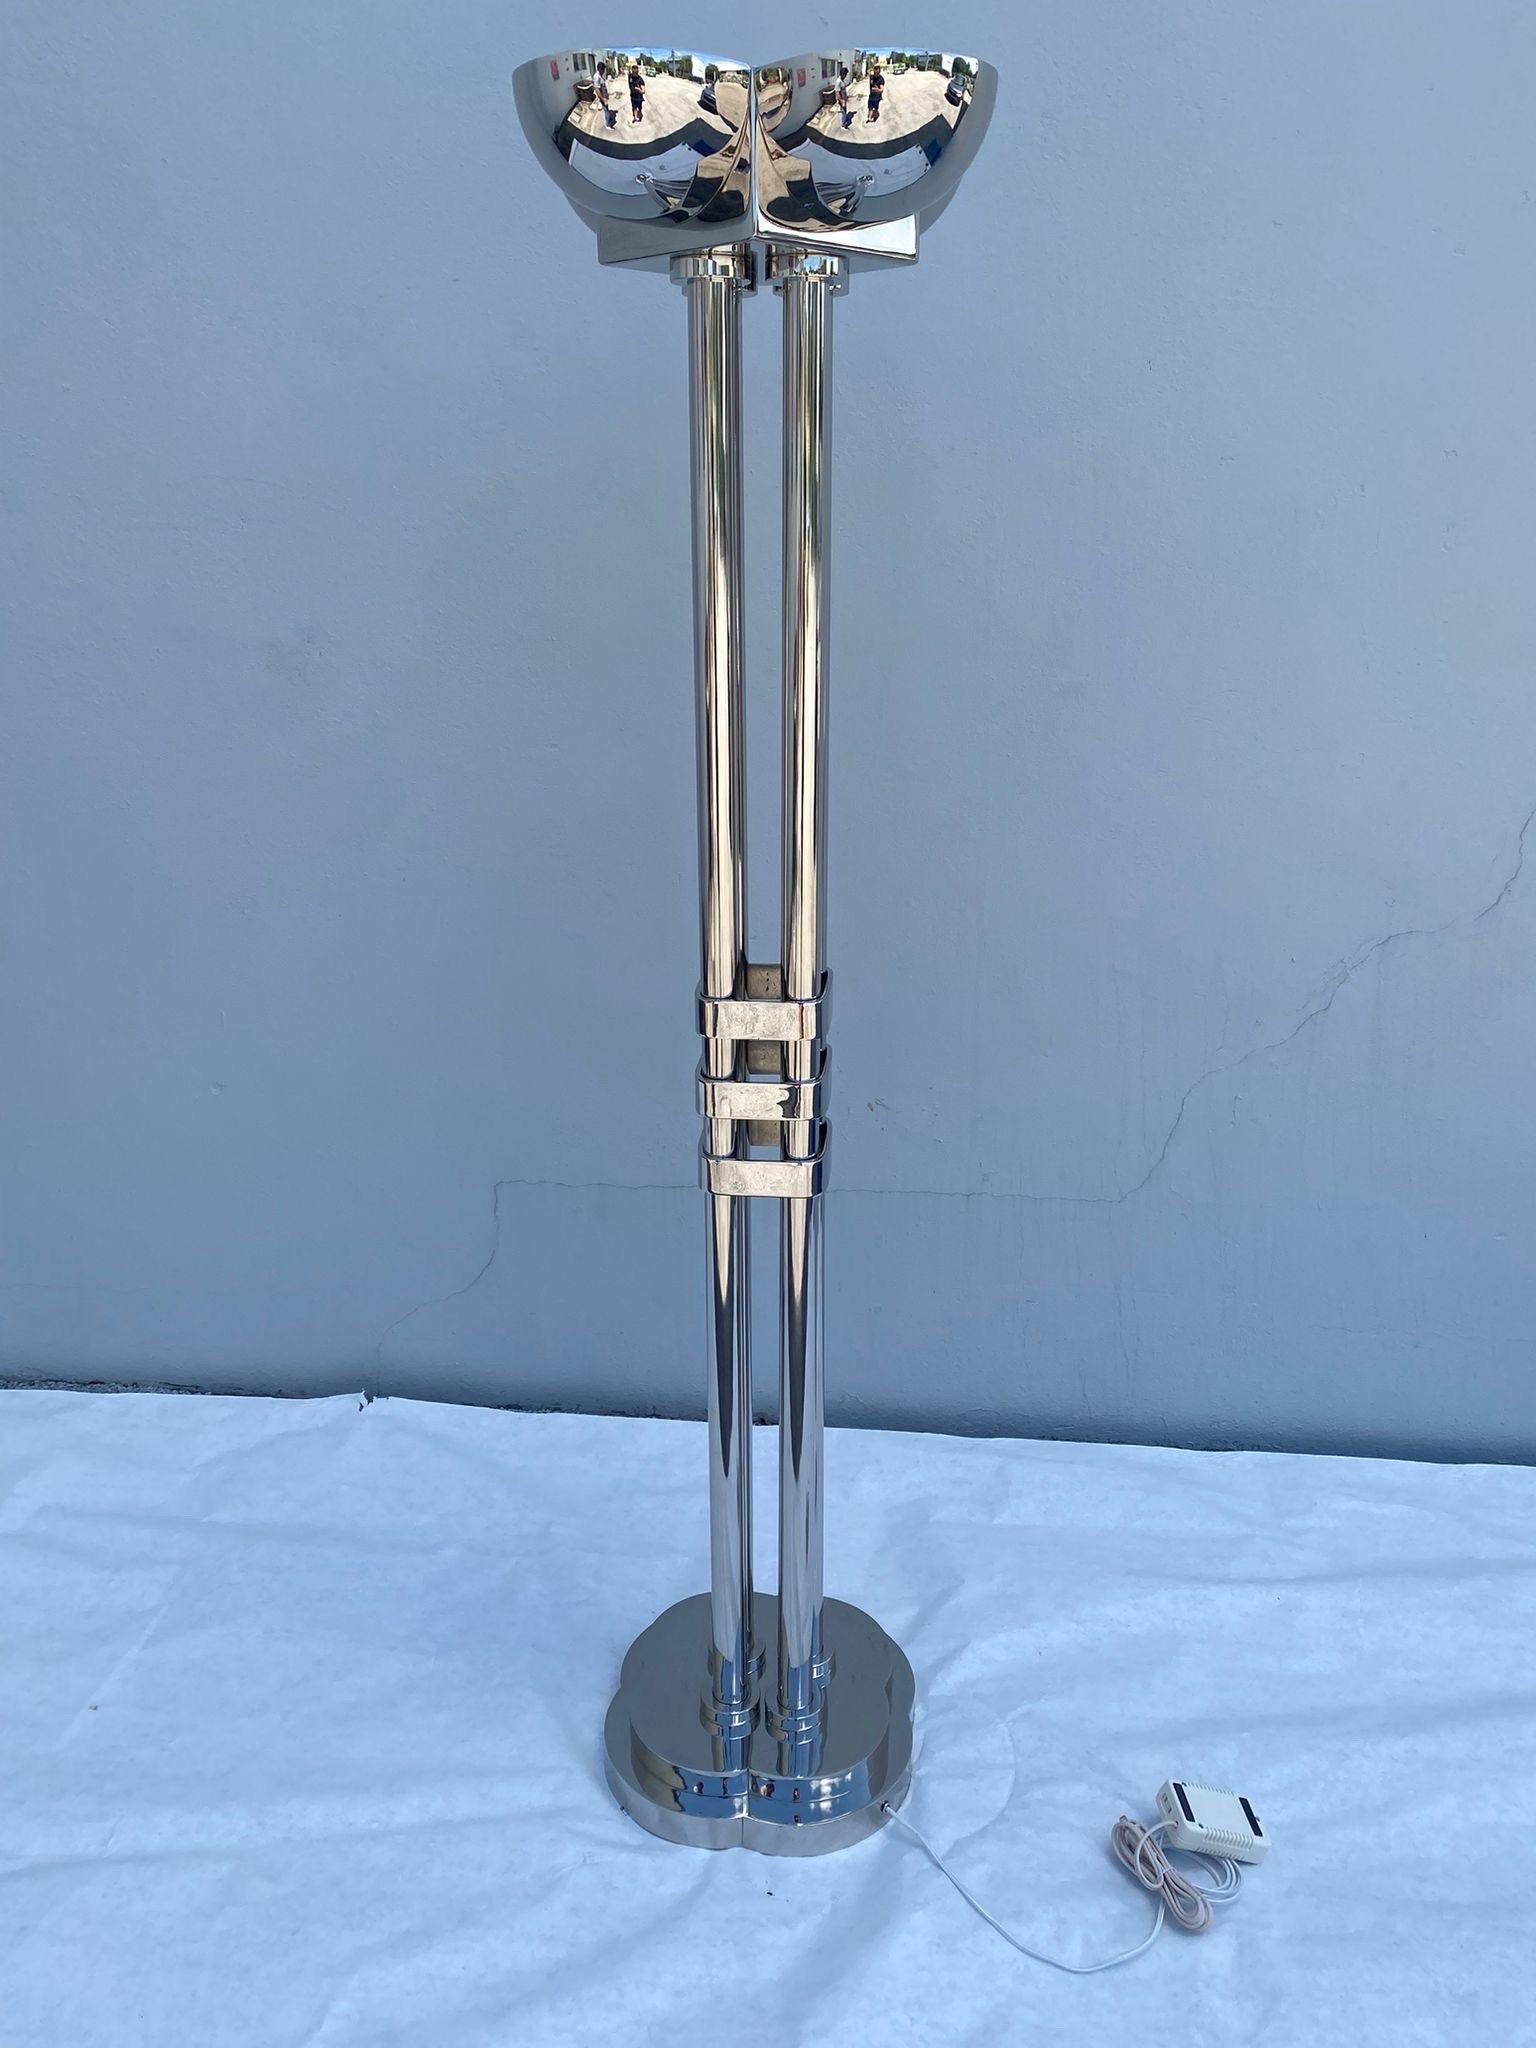 Extremely RARE, this machine era/ Art Deco floor lamp is MARKED 